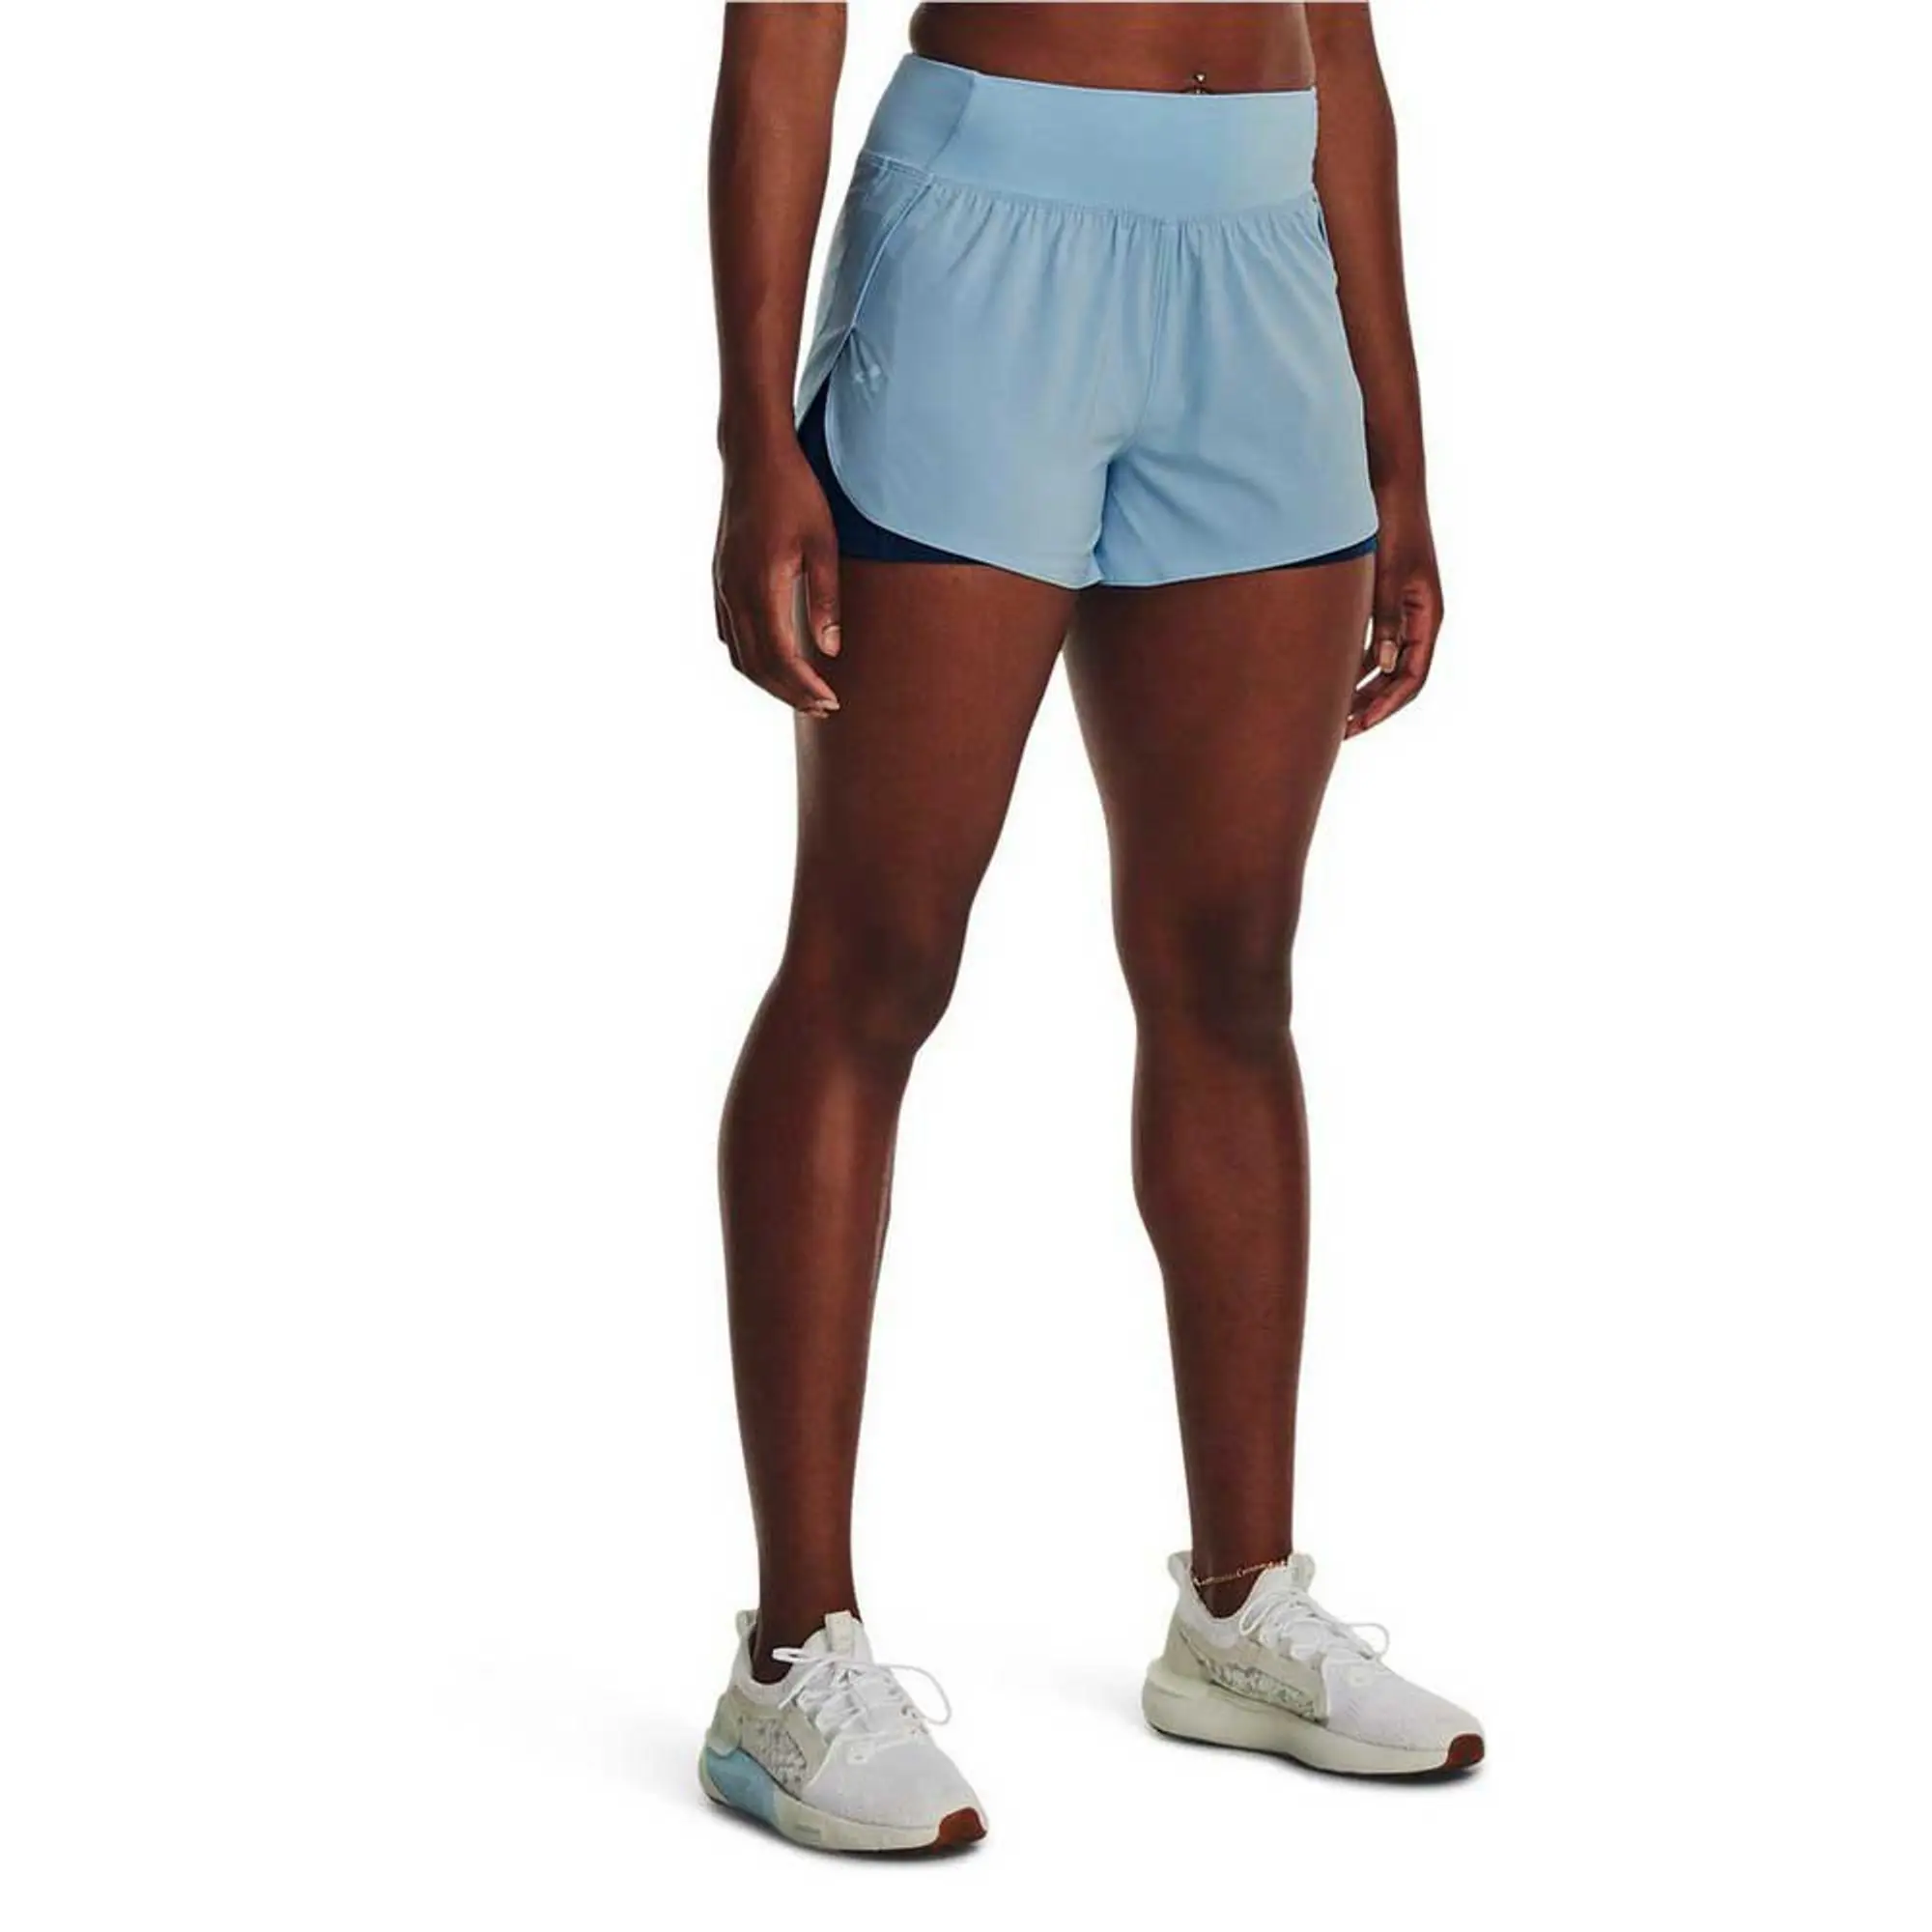 Under Armour Flex Woven 2-in-1 Shorts  L Woman -